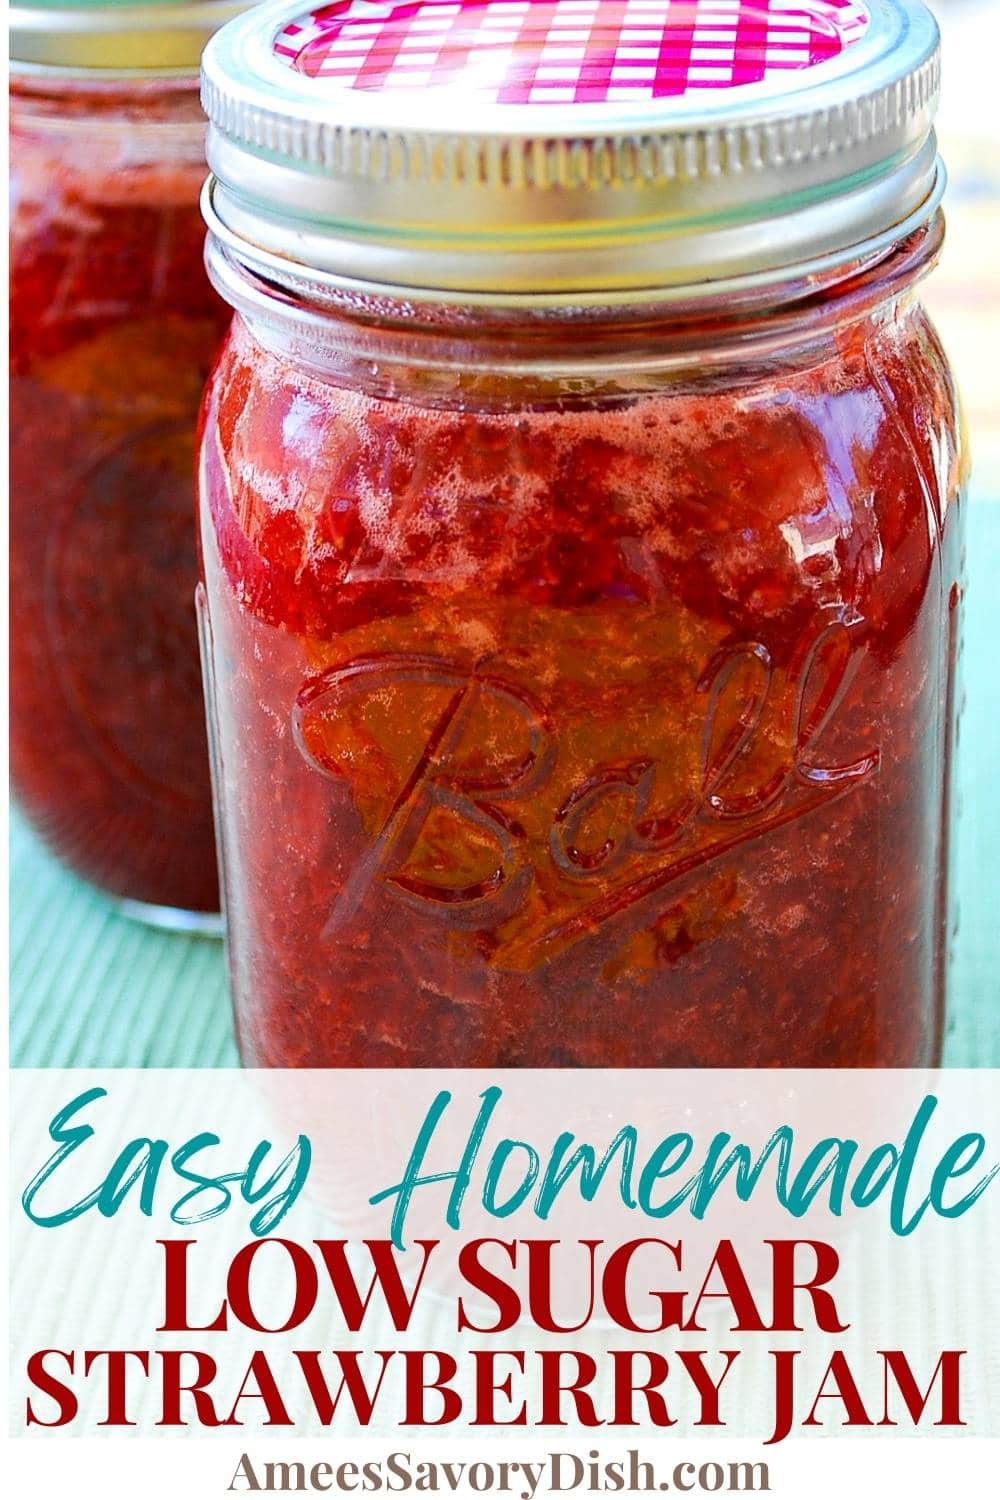 This delicious low sugar strawberry jam recipe is made with fruit juice and agave nectar instead of refined sugar.  No canning required with this easy jam recipe! via @Ameessavorydish